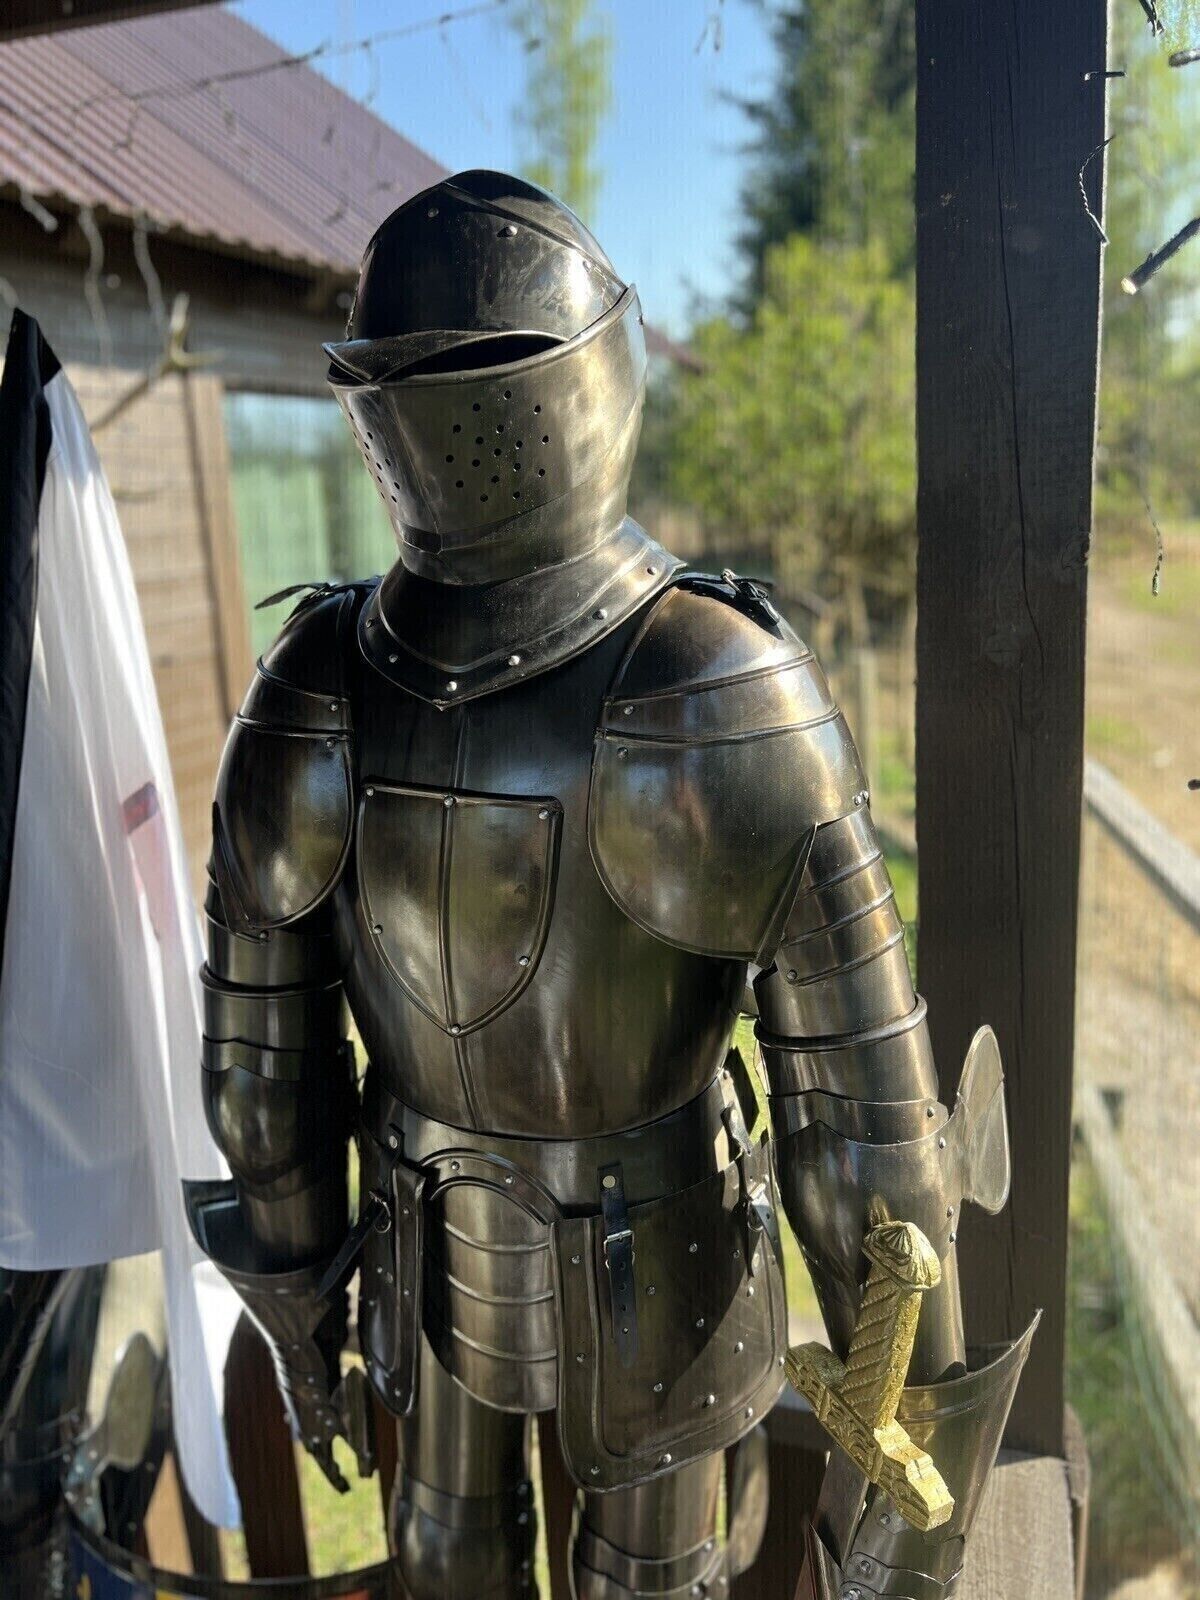 Antique Knight\'s armor Medieval Full Body Armor Suit with Stand